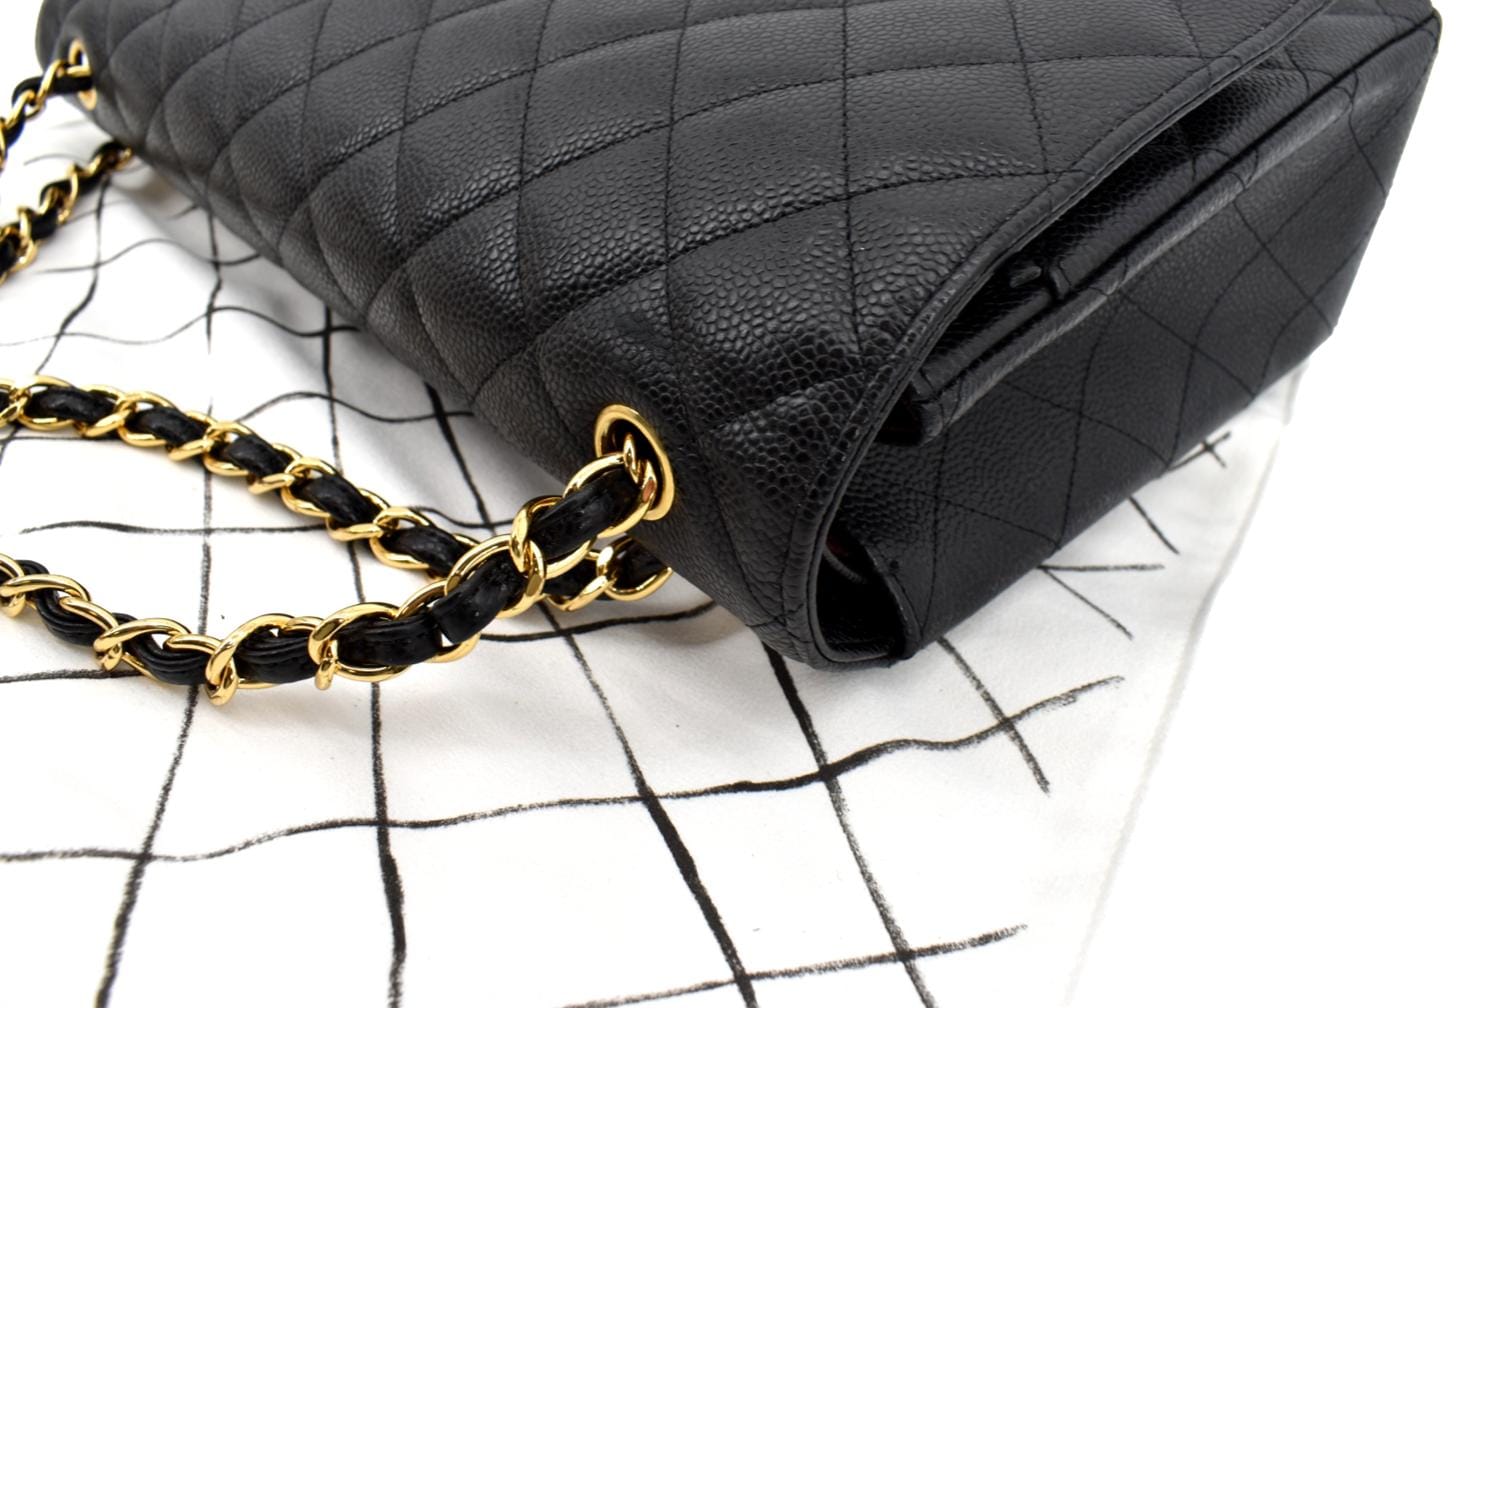 Chanel Black Quilted Leather Maxi Classic Double Flap Bag Chanel